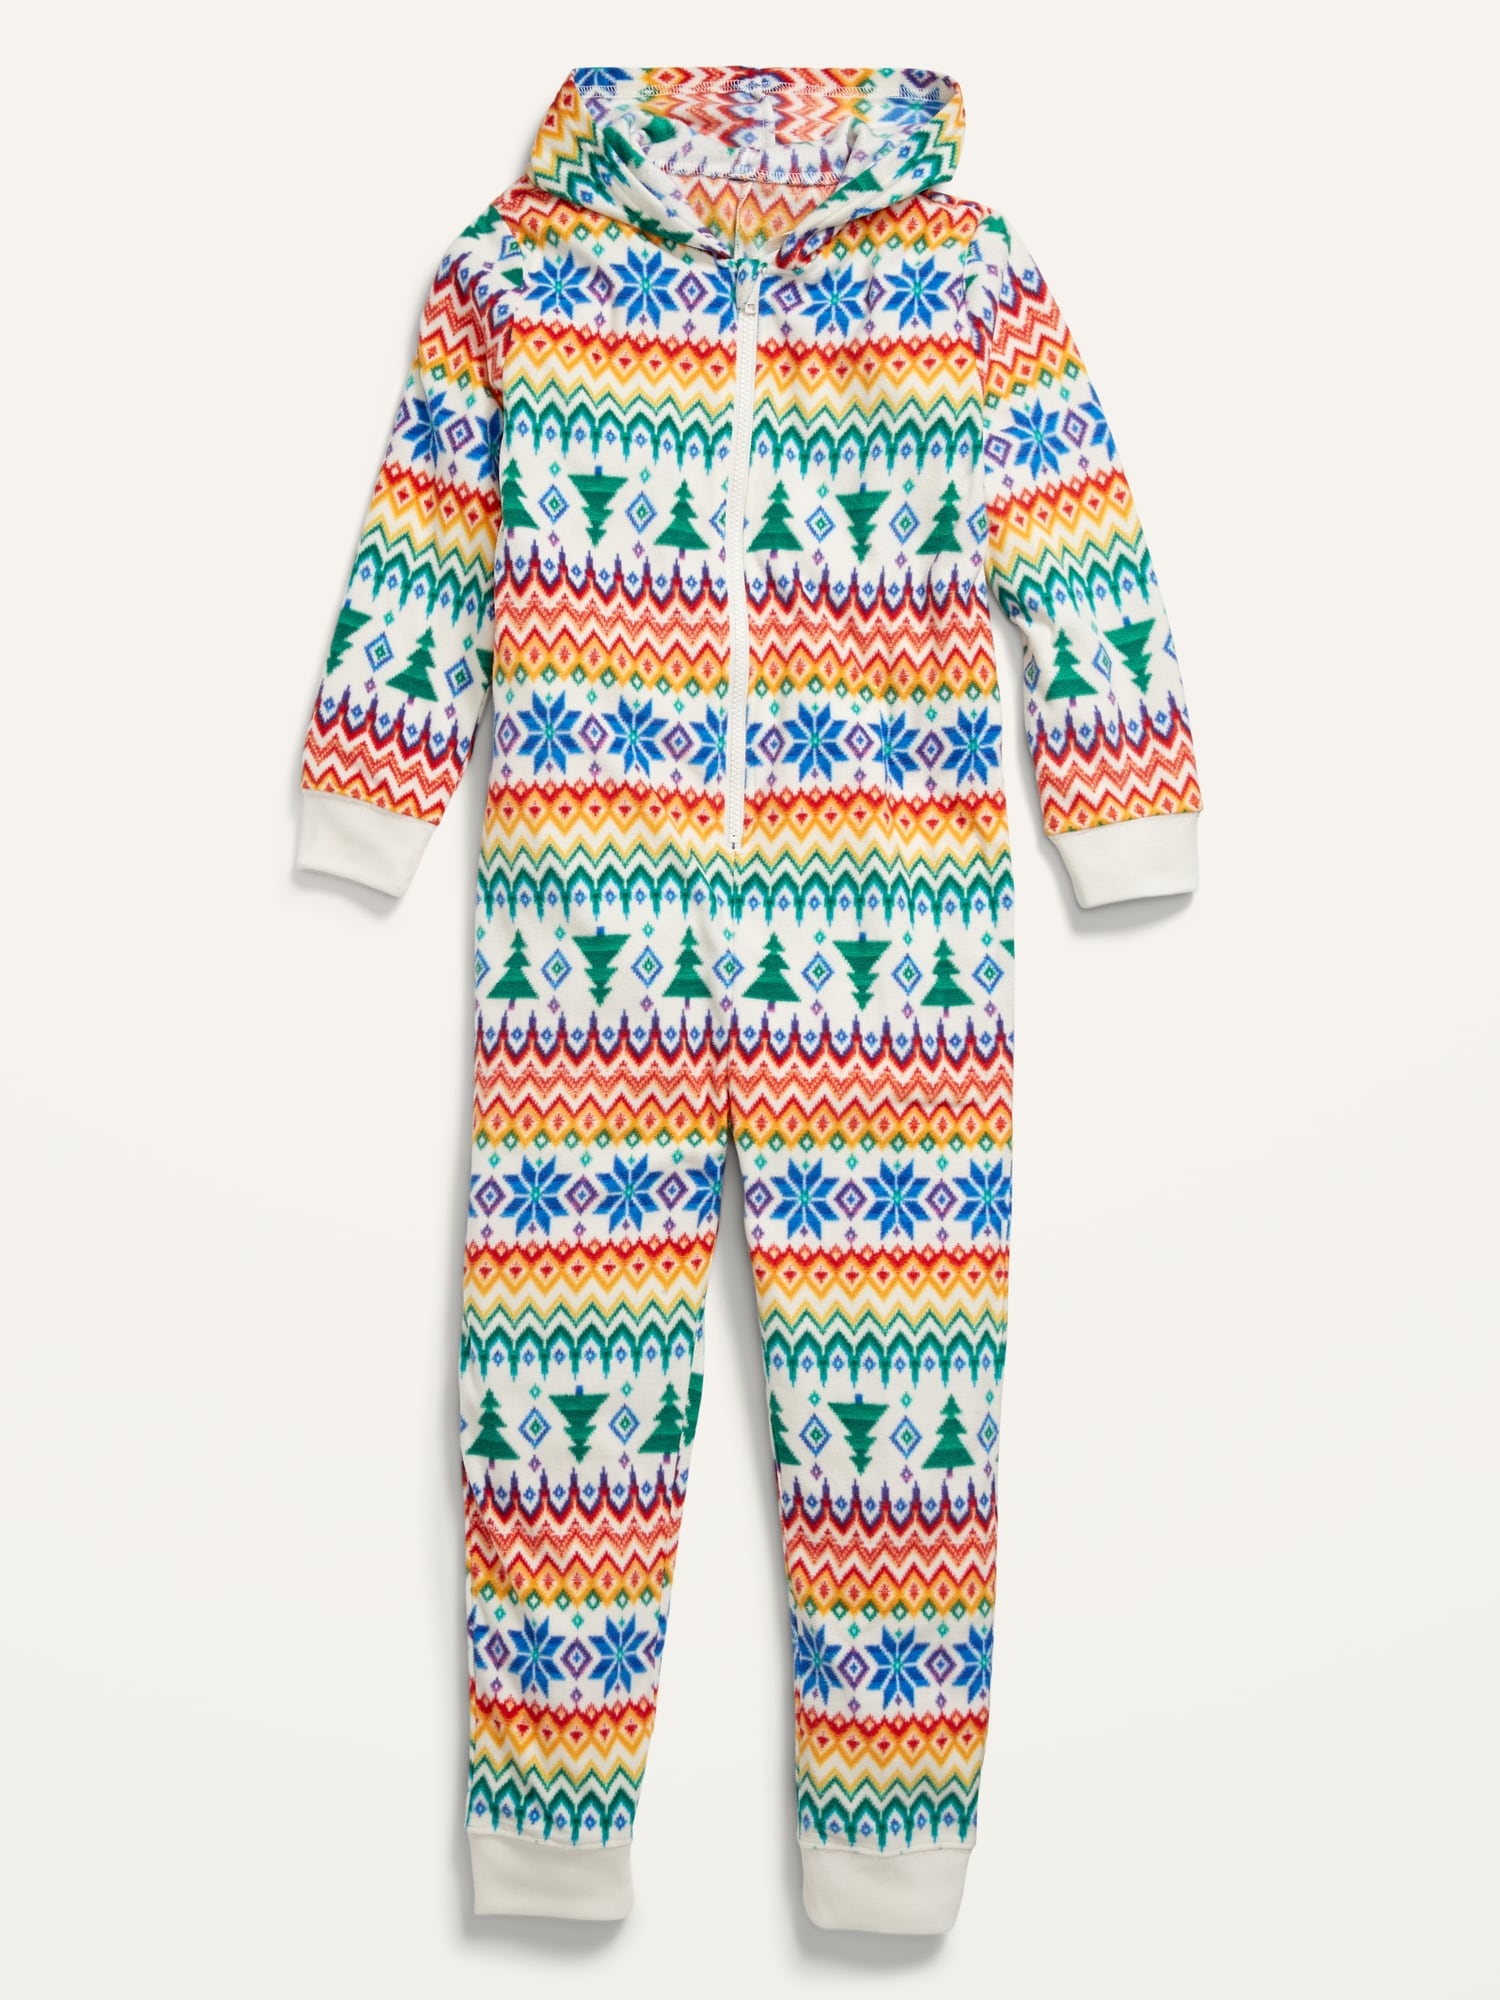 Oldnavy Gender-Neutral Matching Family Hooded Printed One-Piece Pajamas for Kids